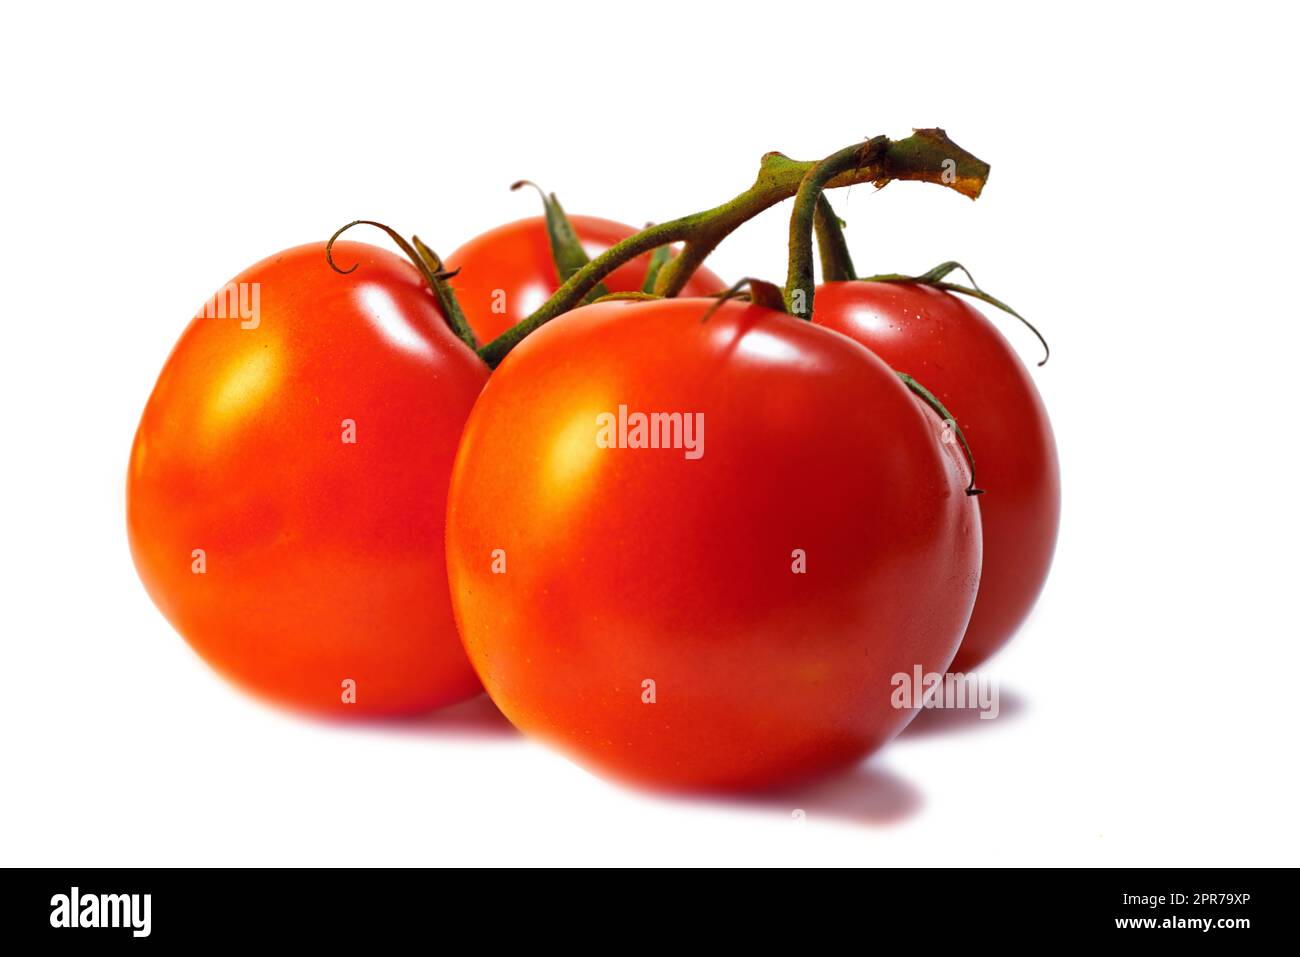 One whole bright red fresh tomato, vegetable isolated inside of a bright studio against a white background. Fresh from the farm. A healthy and nutritious snack to add to your vegan or vegetarian diet Stock Photo